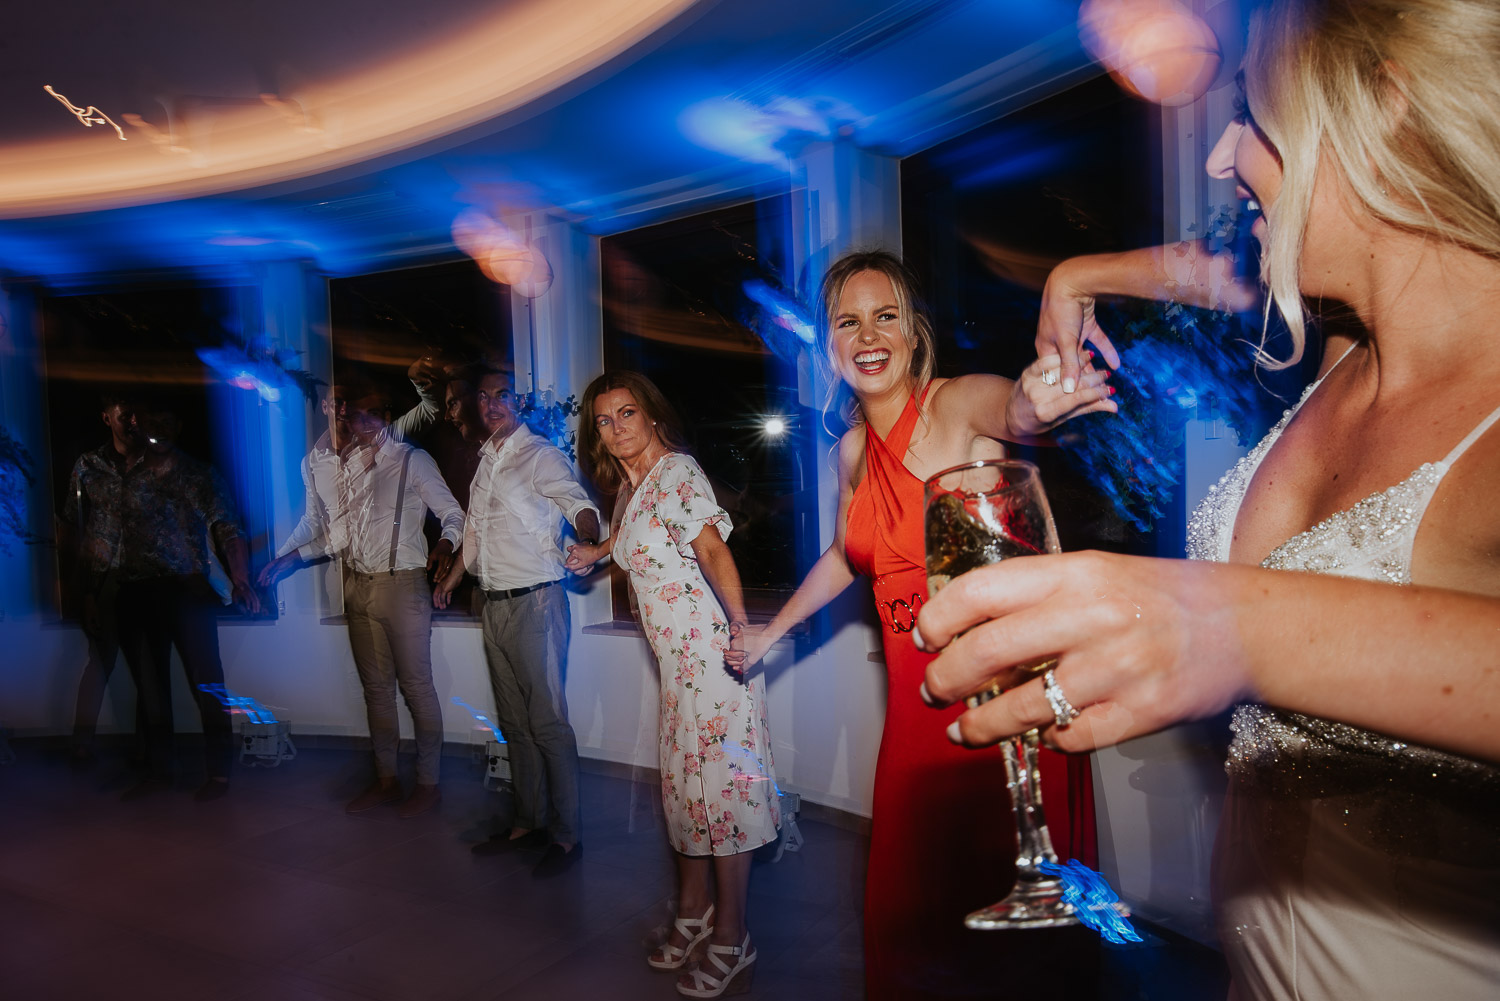 Wedding photographer Santorini: bride and the guests making wave on the dance floor by Ben and Vesna.